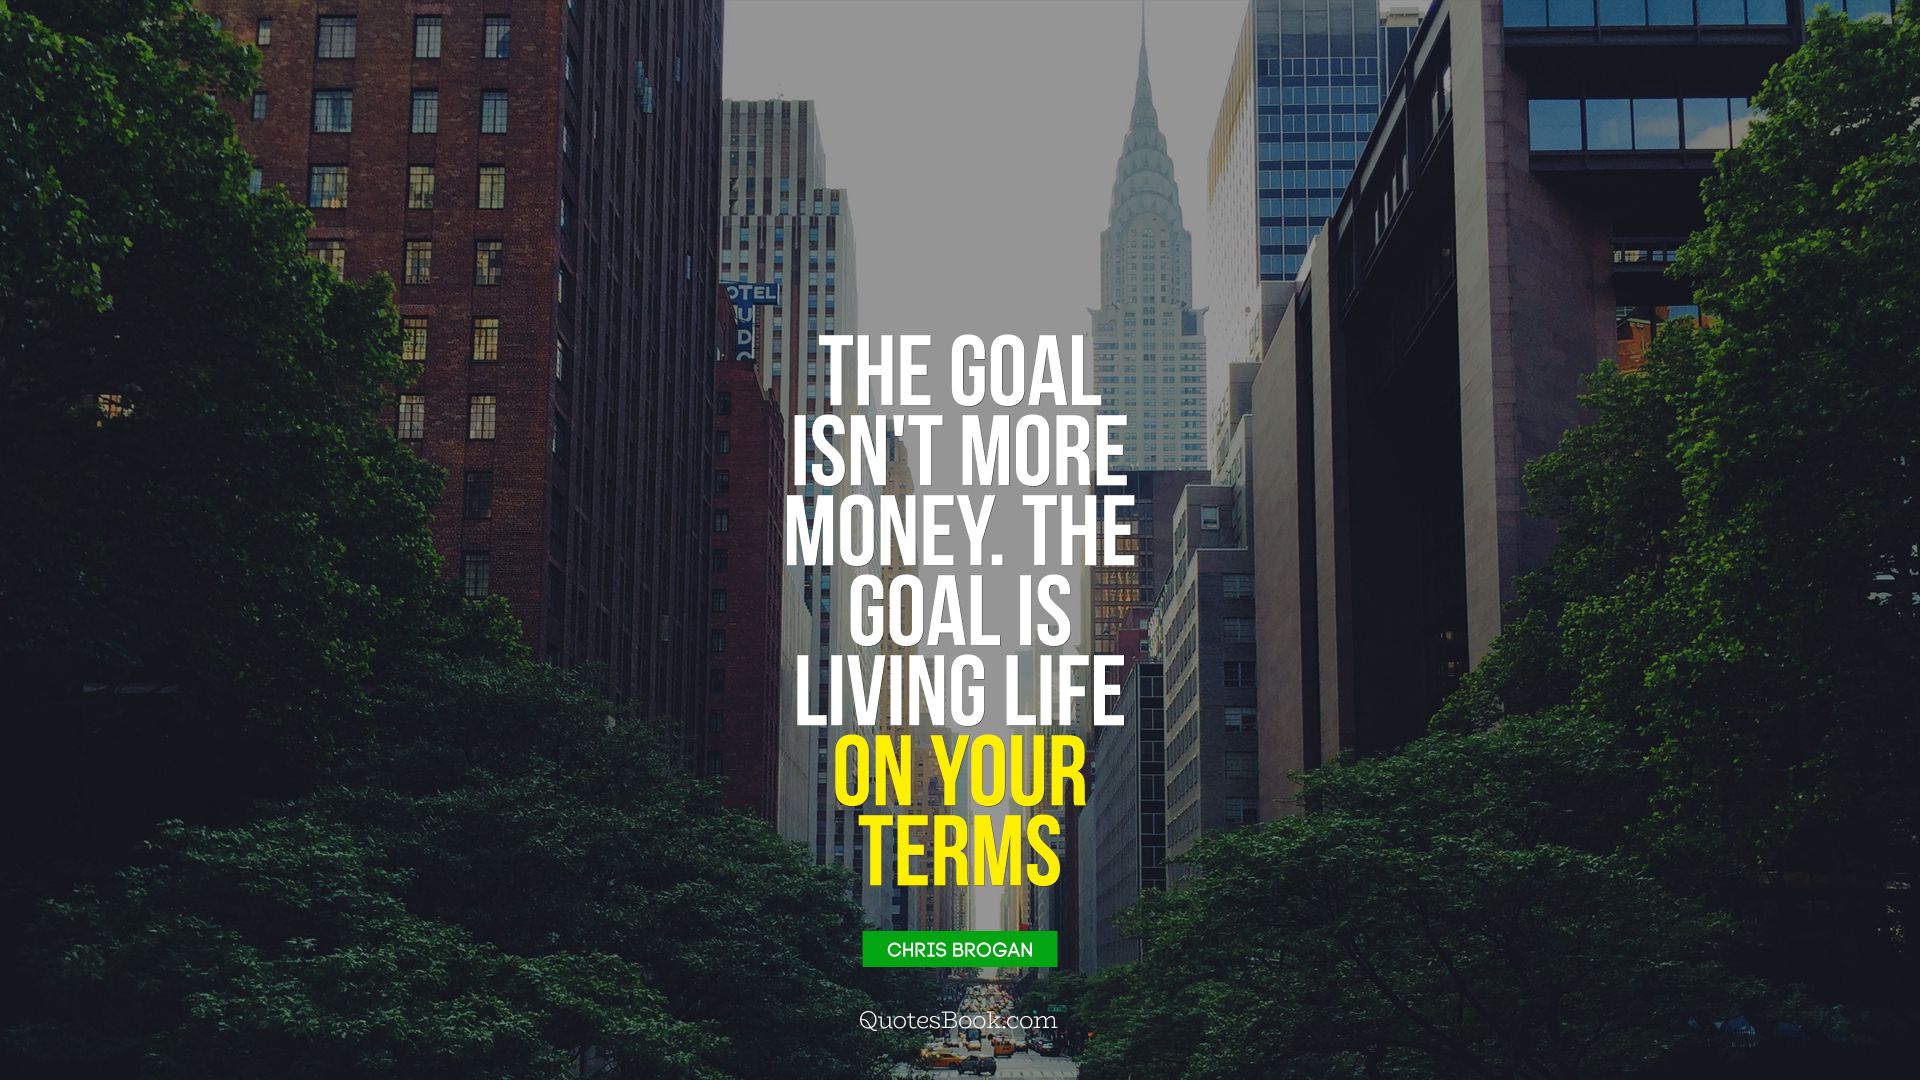 The goal isn't more money. The goal is living life on your terms . - Quote by Chris Brogan